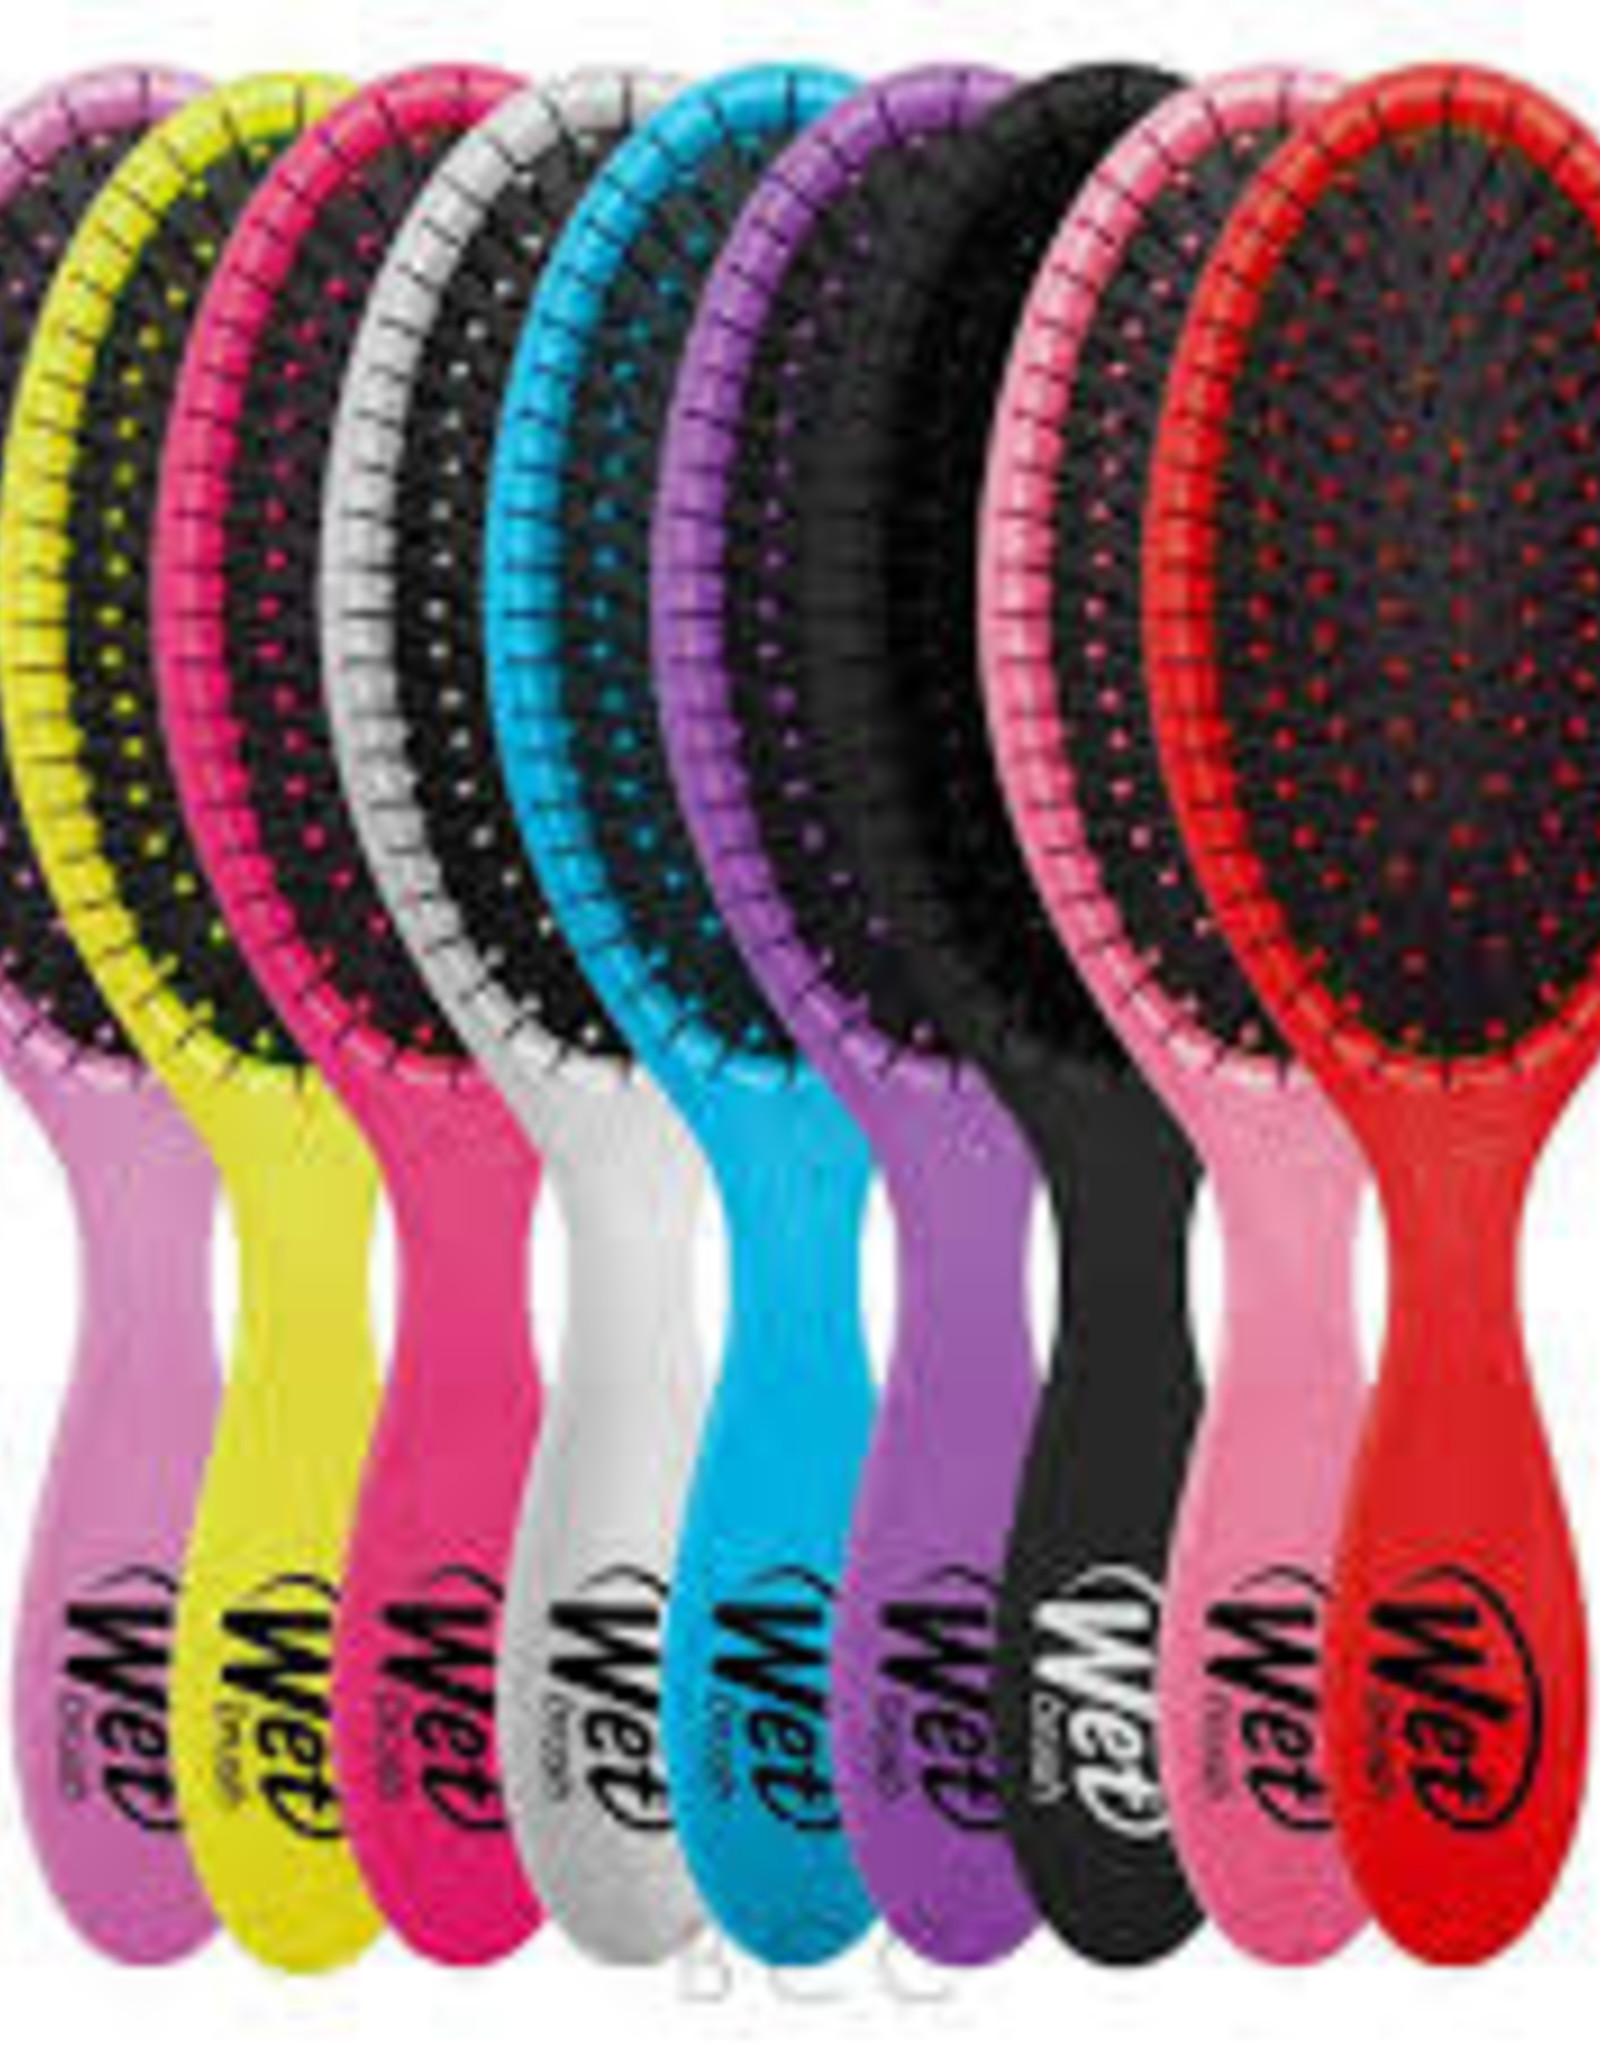 Wet Brush Large - assorted colors/patterns